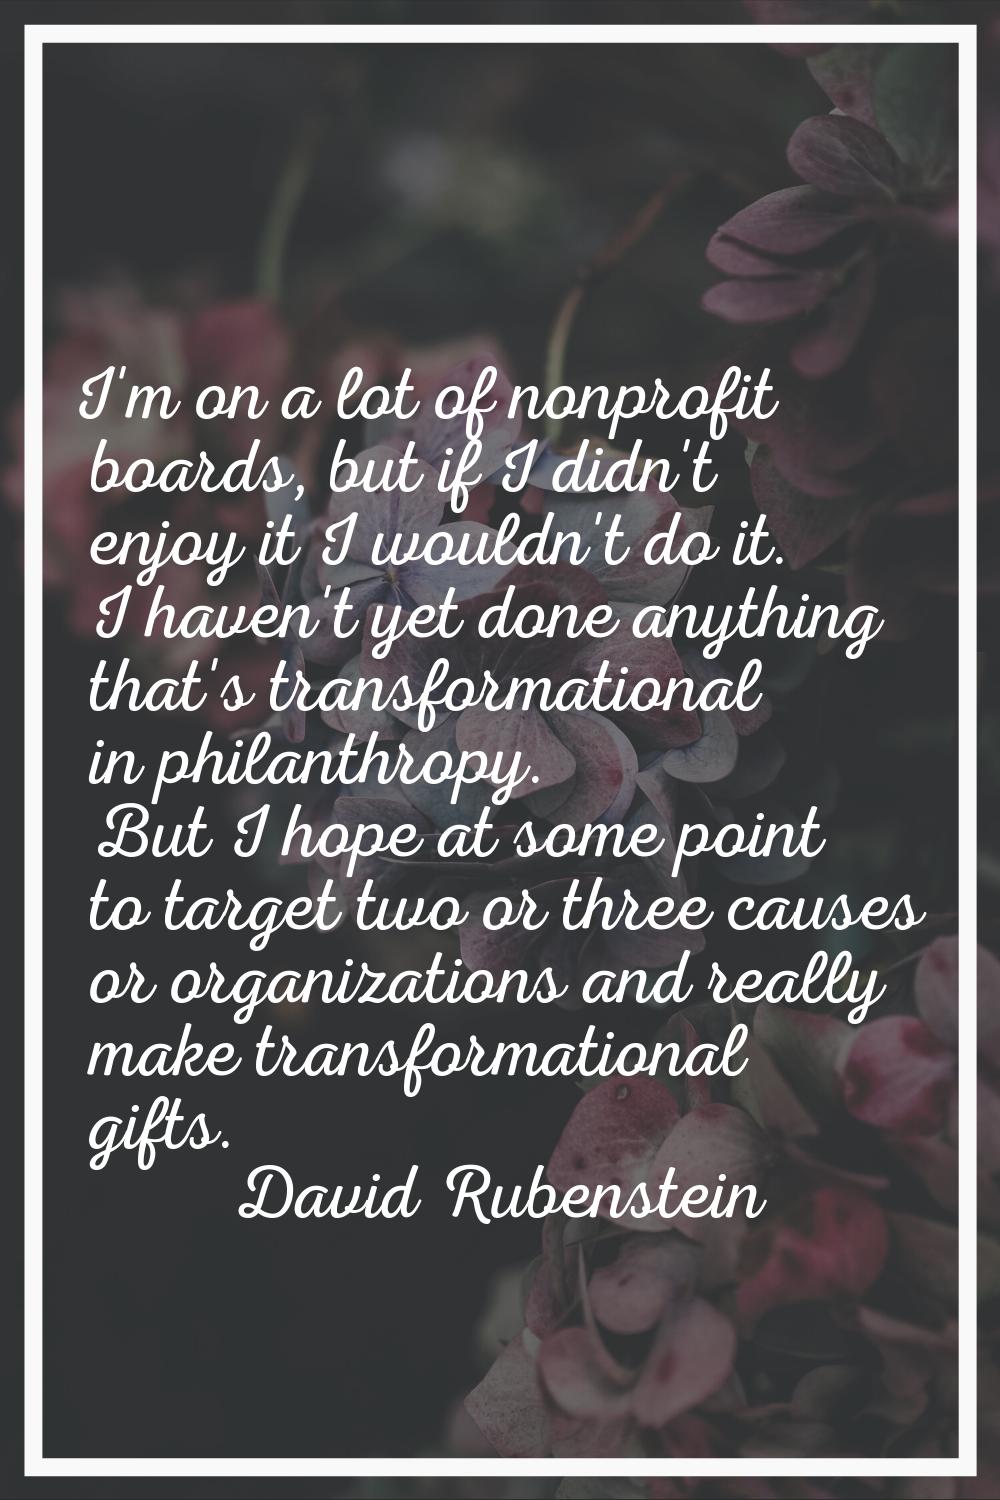 I'm on a lot of nonprofit boards, but if I didn't enjoy it I wouldn't do it. I haven't yet done any